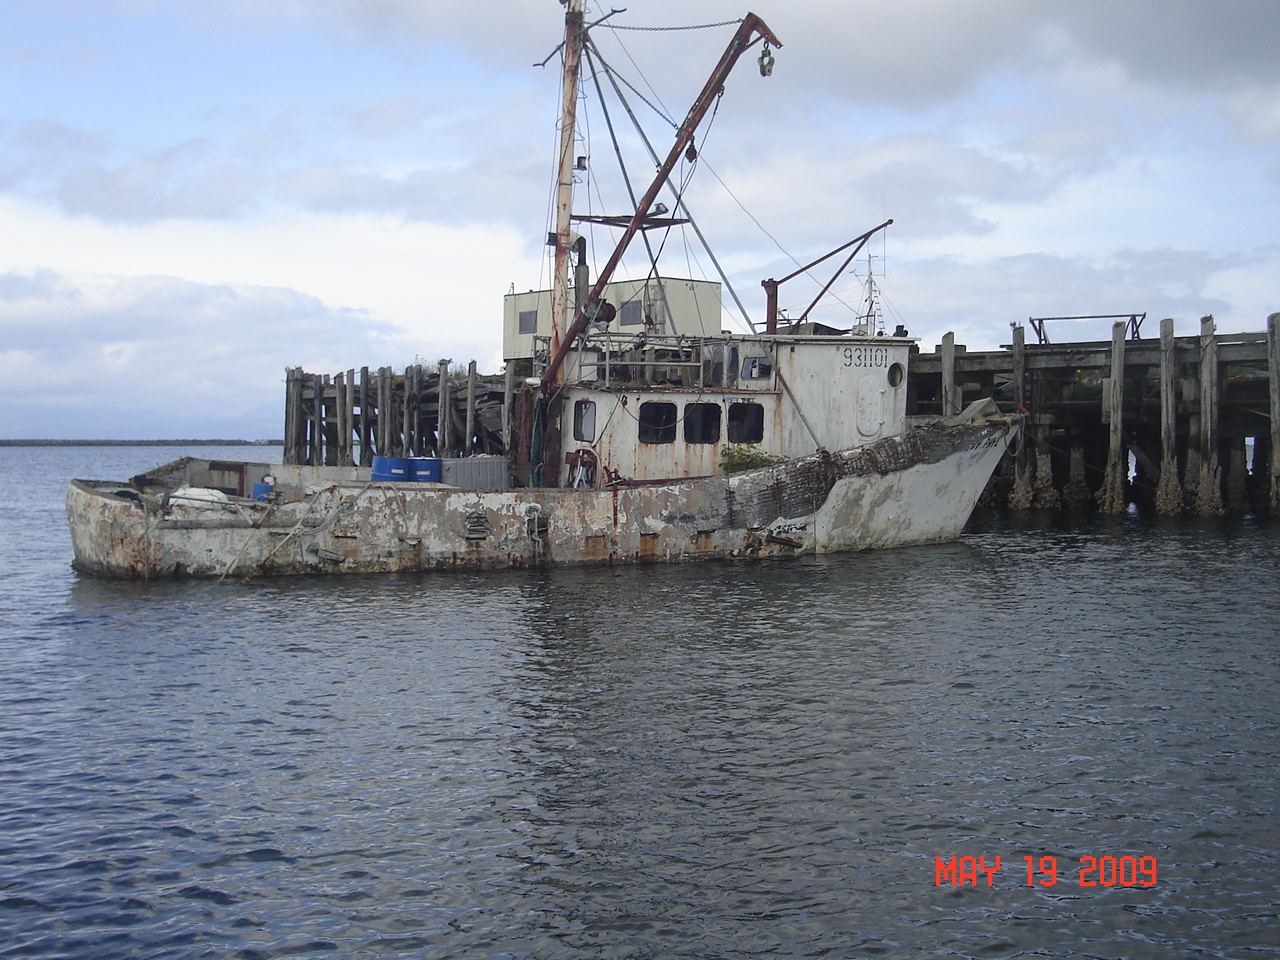 The Lady Phyl in Neah Bay